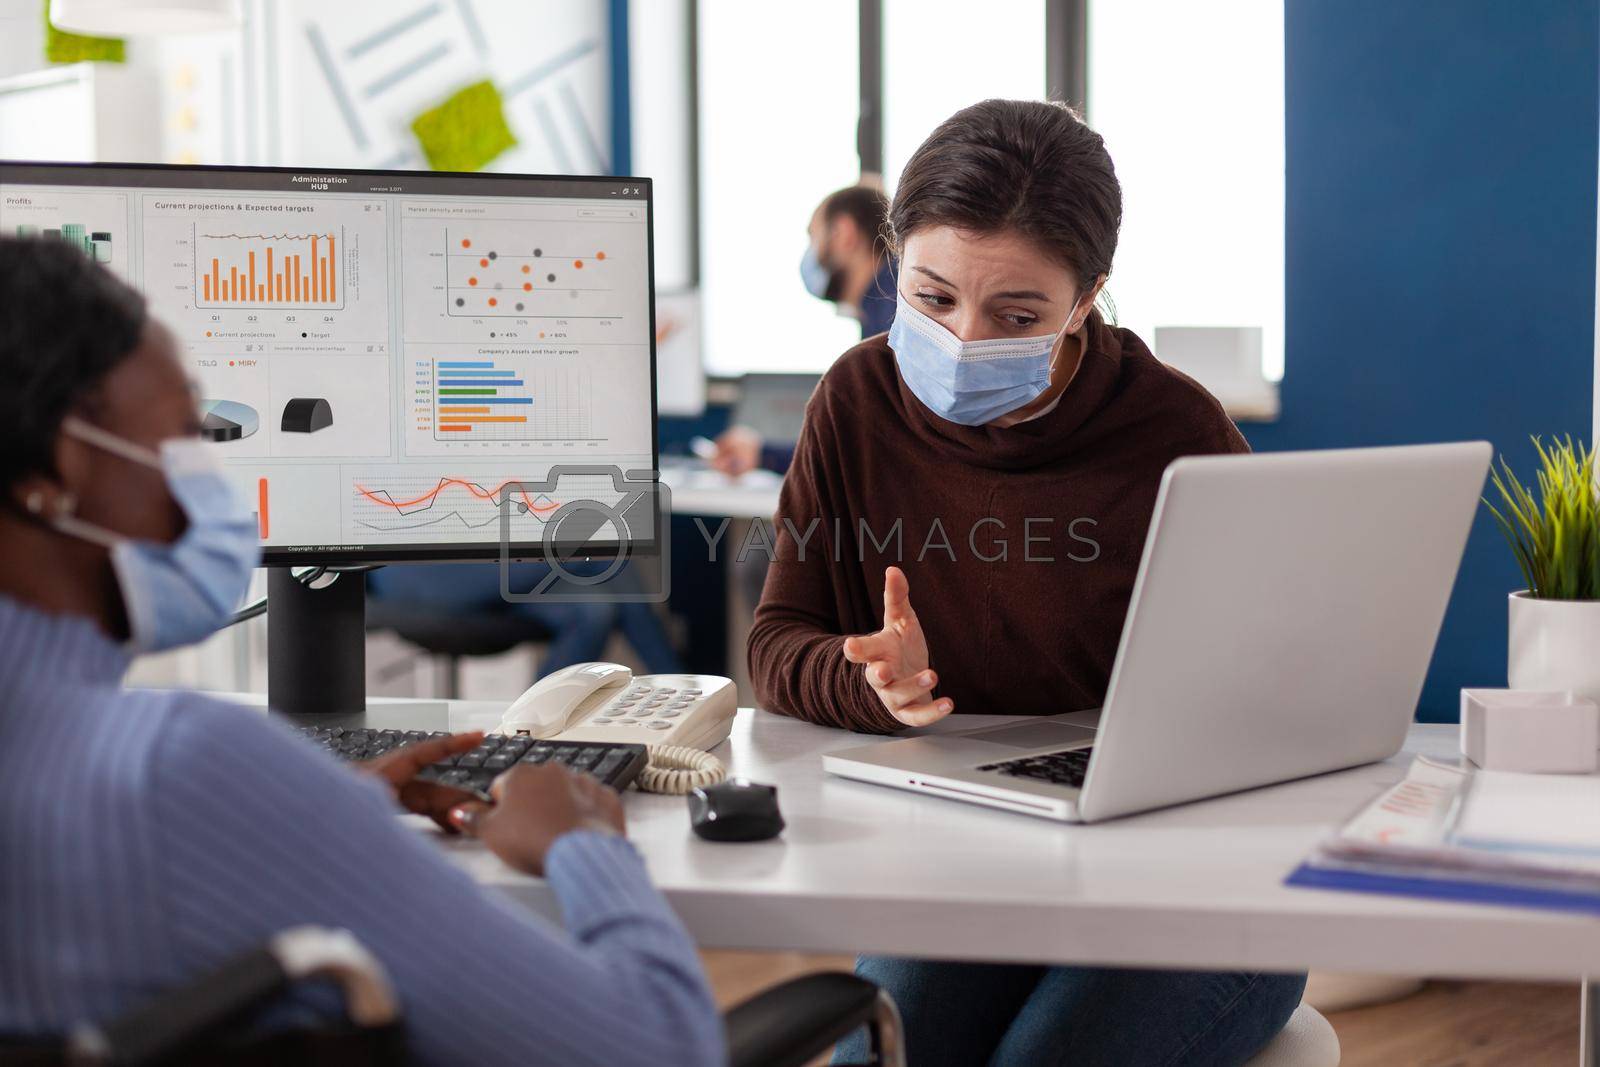 Royalty free image of Multi-ethnic business team with protective face masks against coronavirus by DCStudio